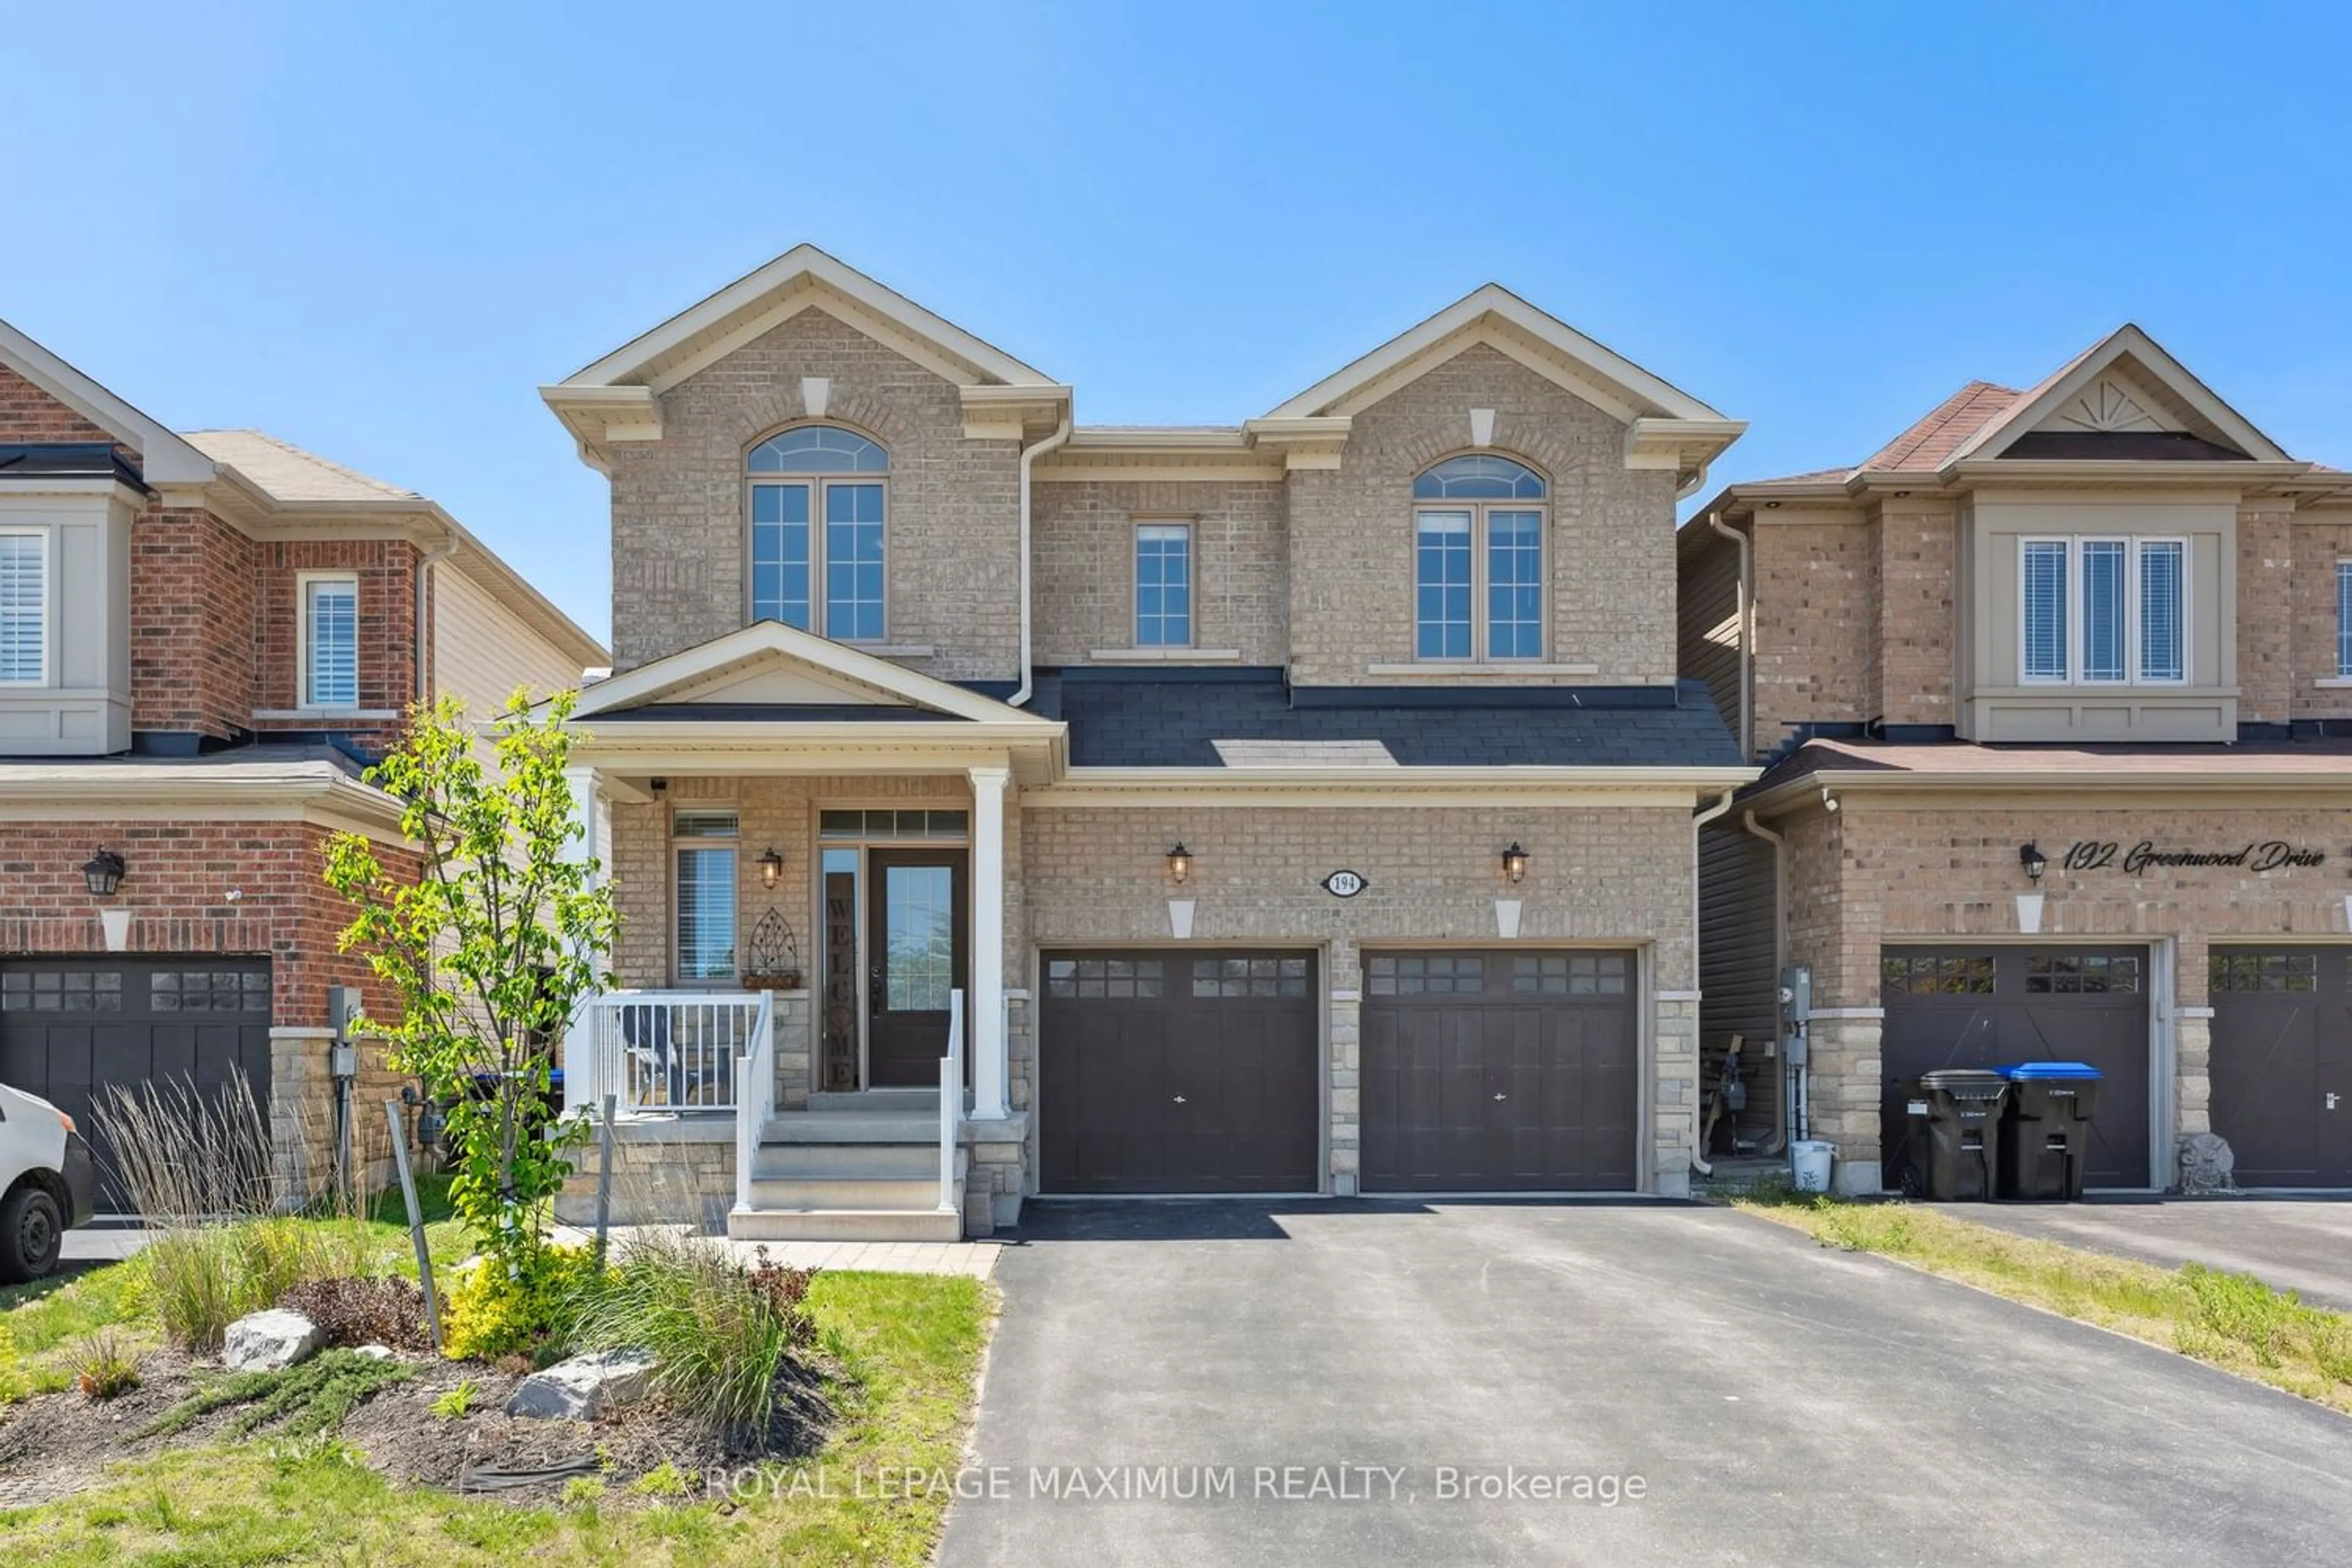 Home with brick exterior material for 194 Greenwood Dr, Essa Ontario L0M 1B4